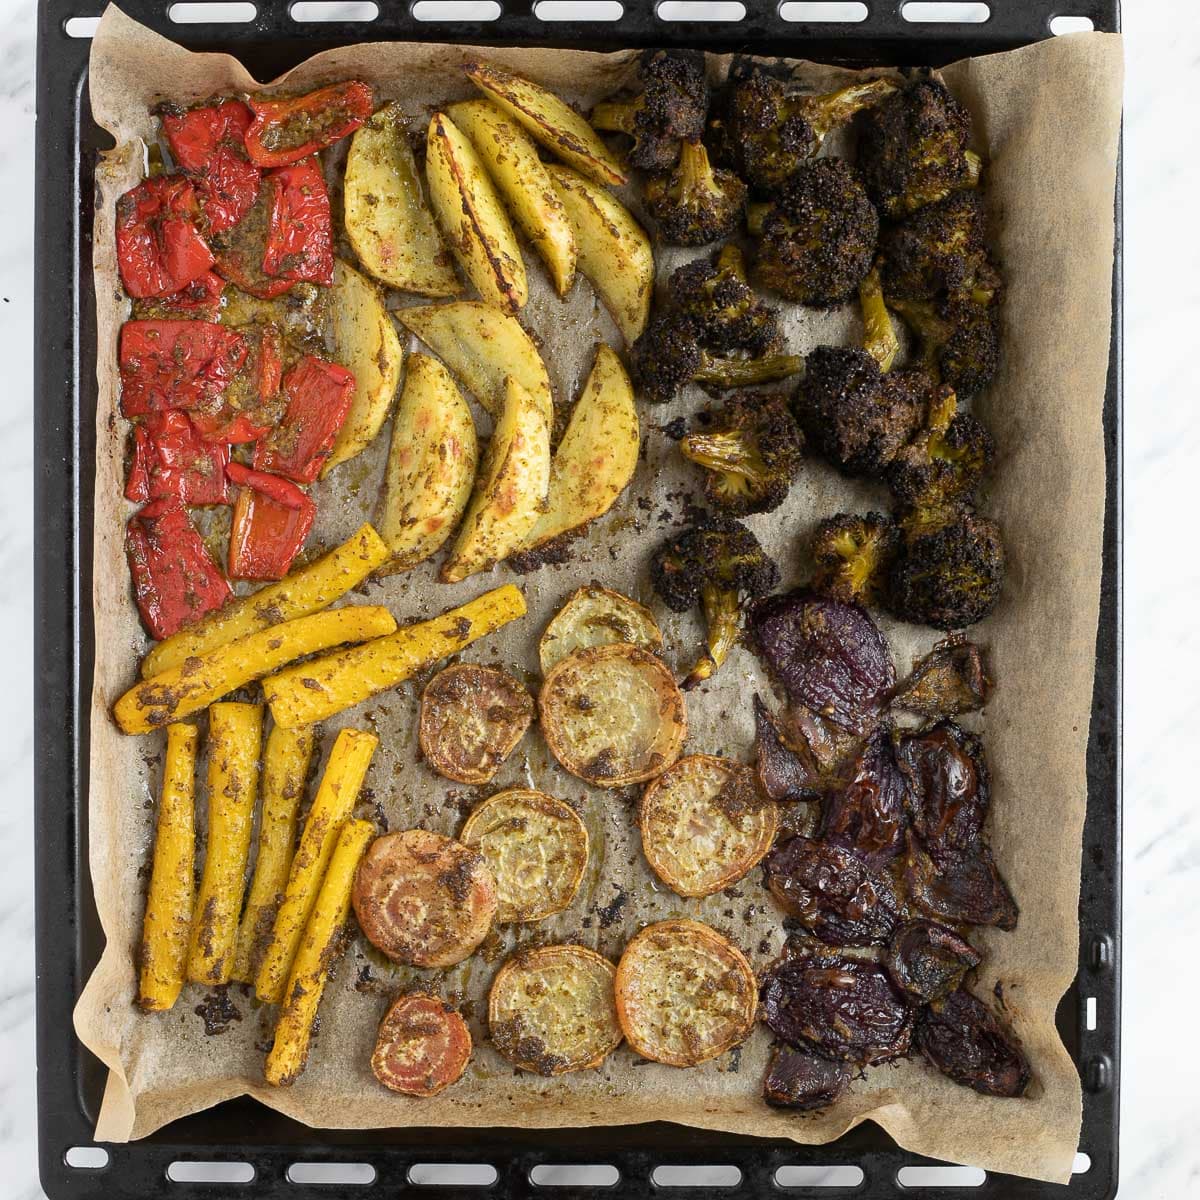 A large black sheet pan covered with parchment pepper with roasted veggies like red bell pepper, broccoli, pink beet, potatoes, yellow carrot, red onion and green pesto sauce covered in green pesto.